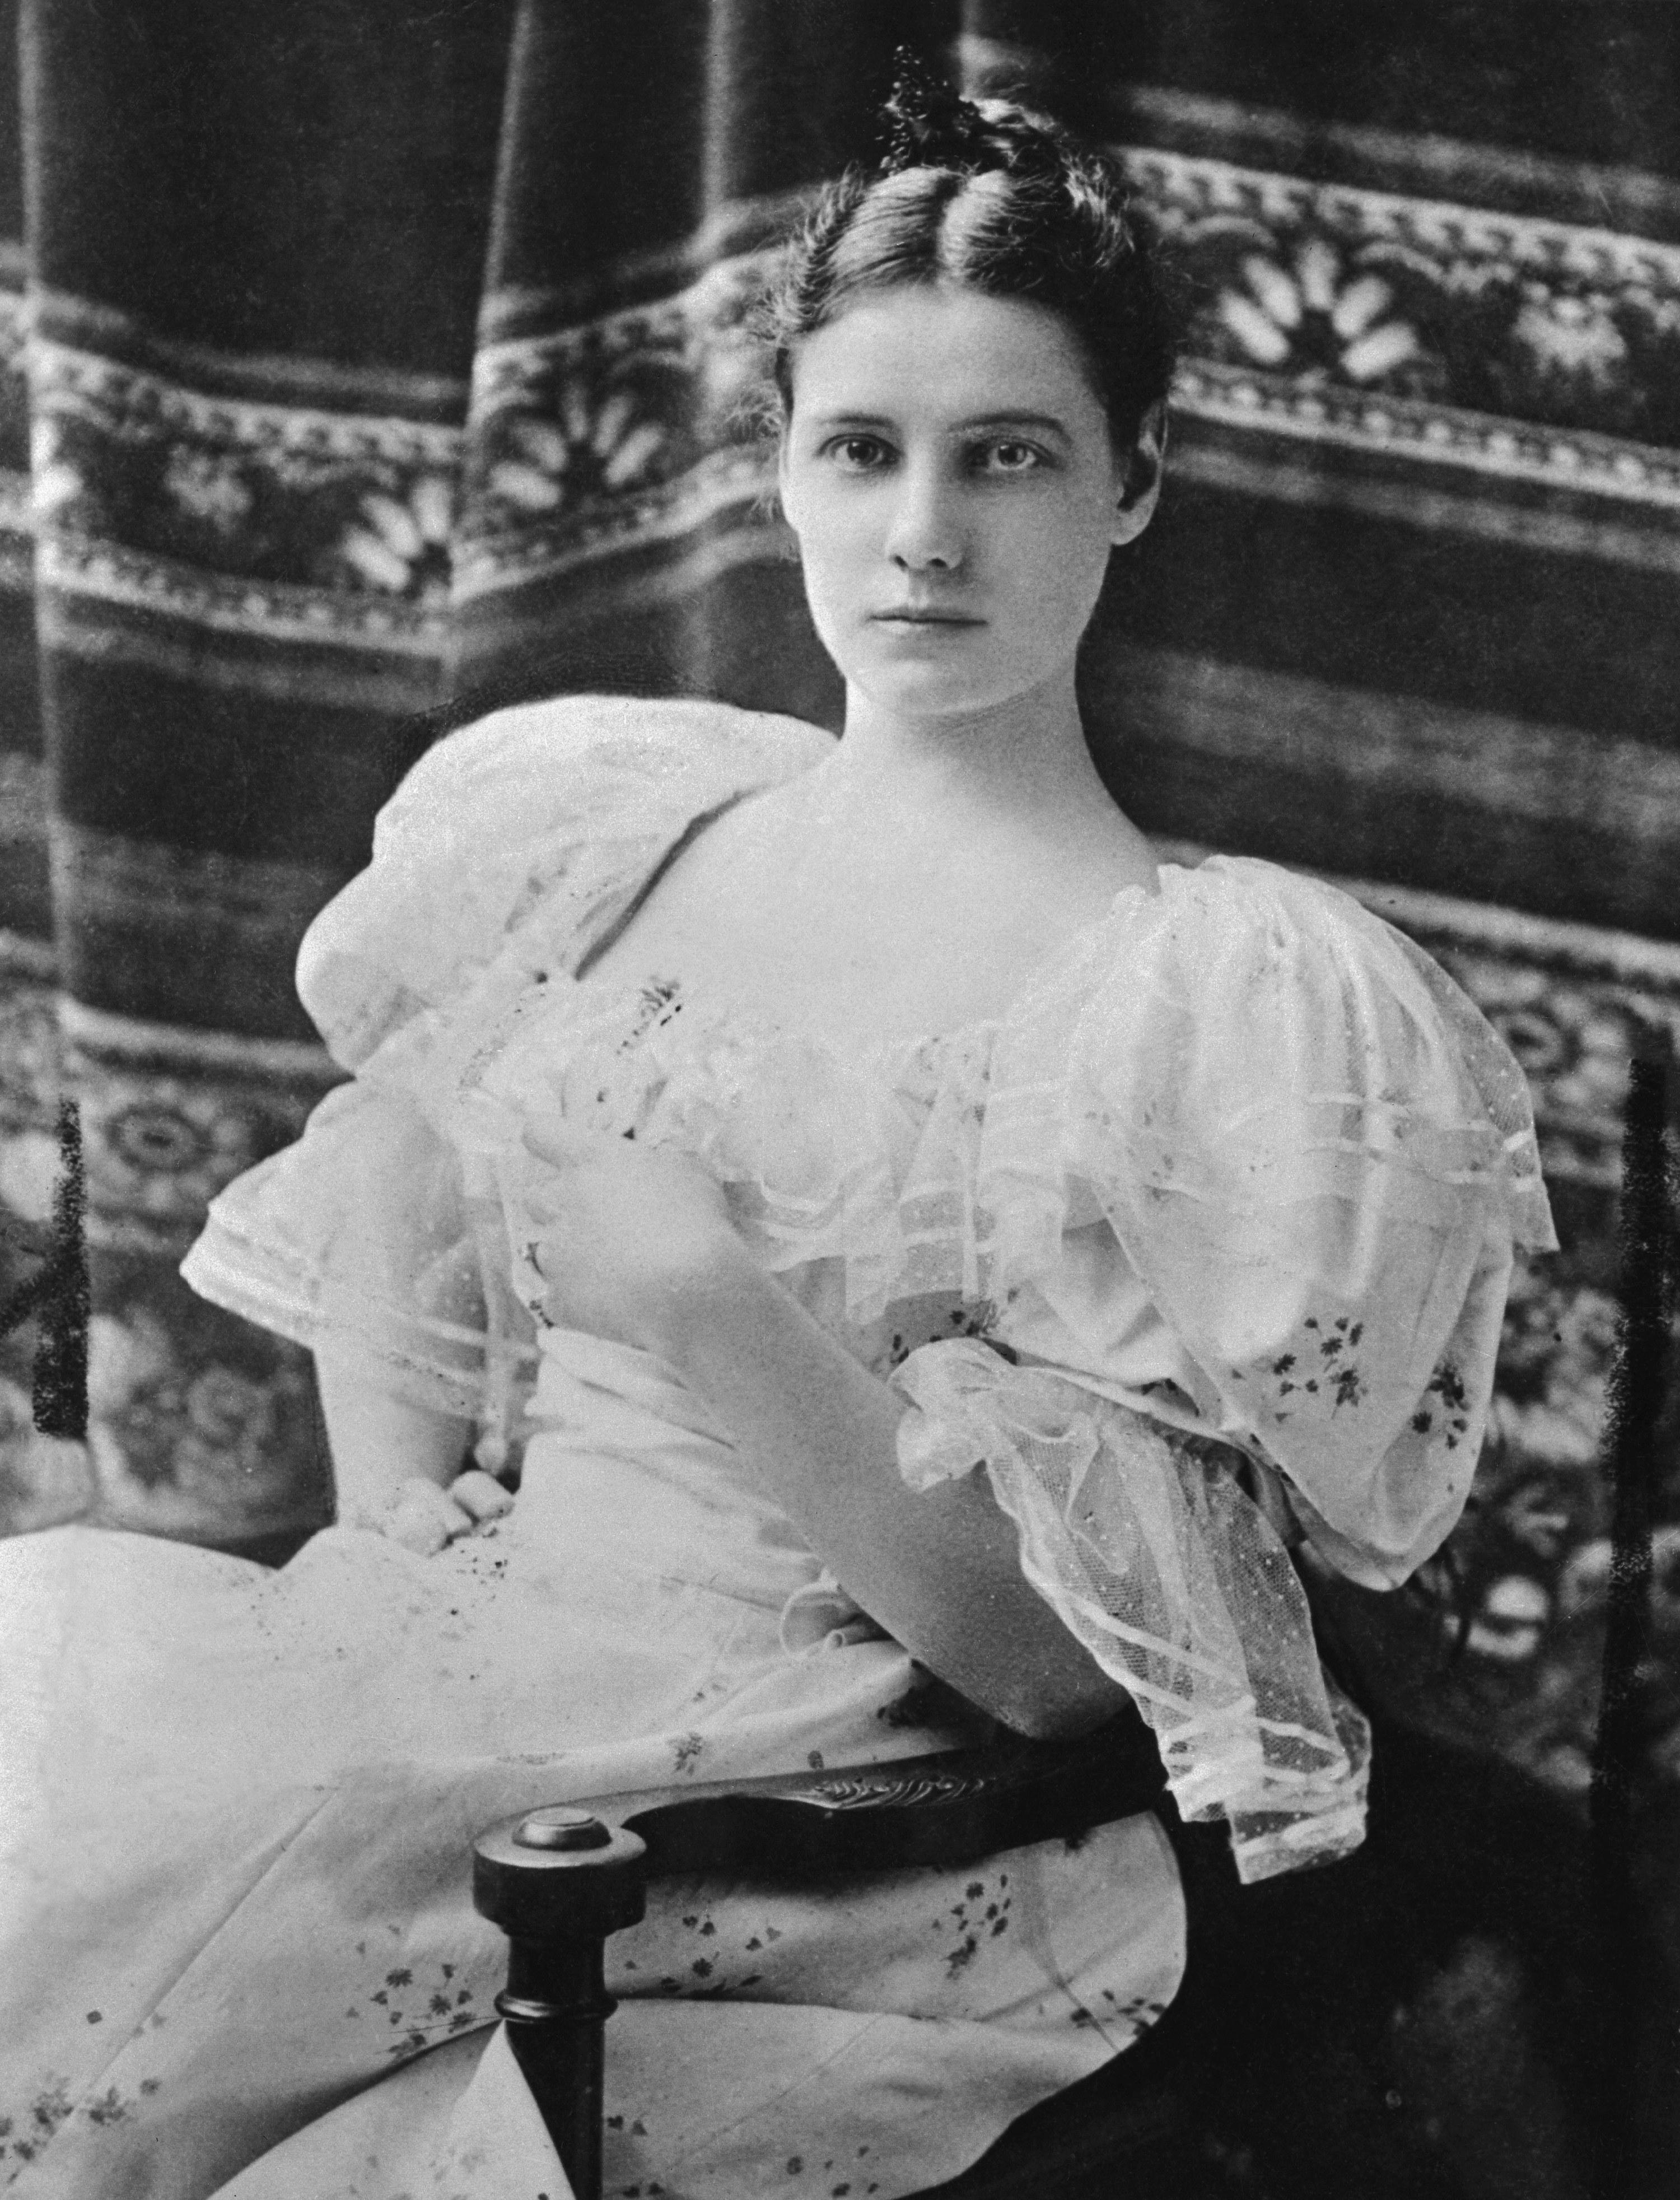 A formal portrait of Nellie Bly, with her hair tied back and wearing a ruffled dress as she sits on a chair and looks straight into the camera